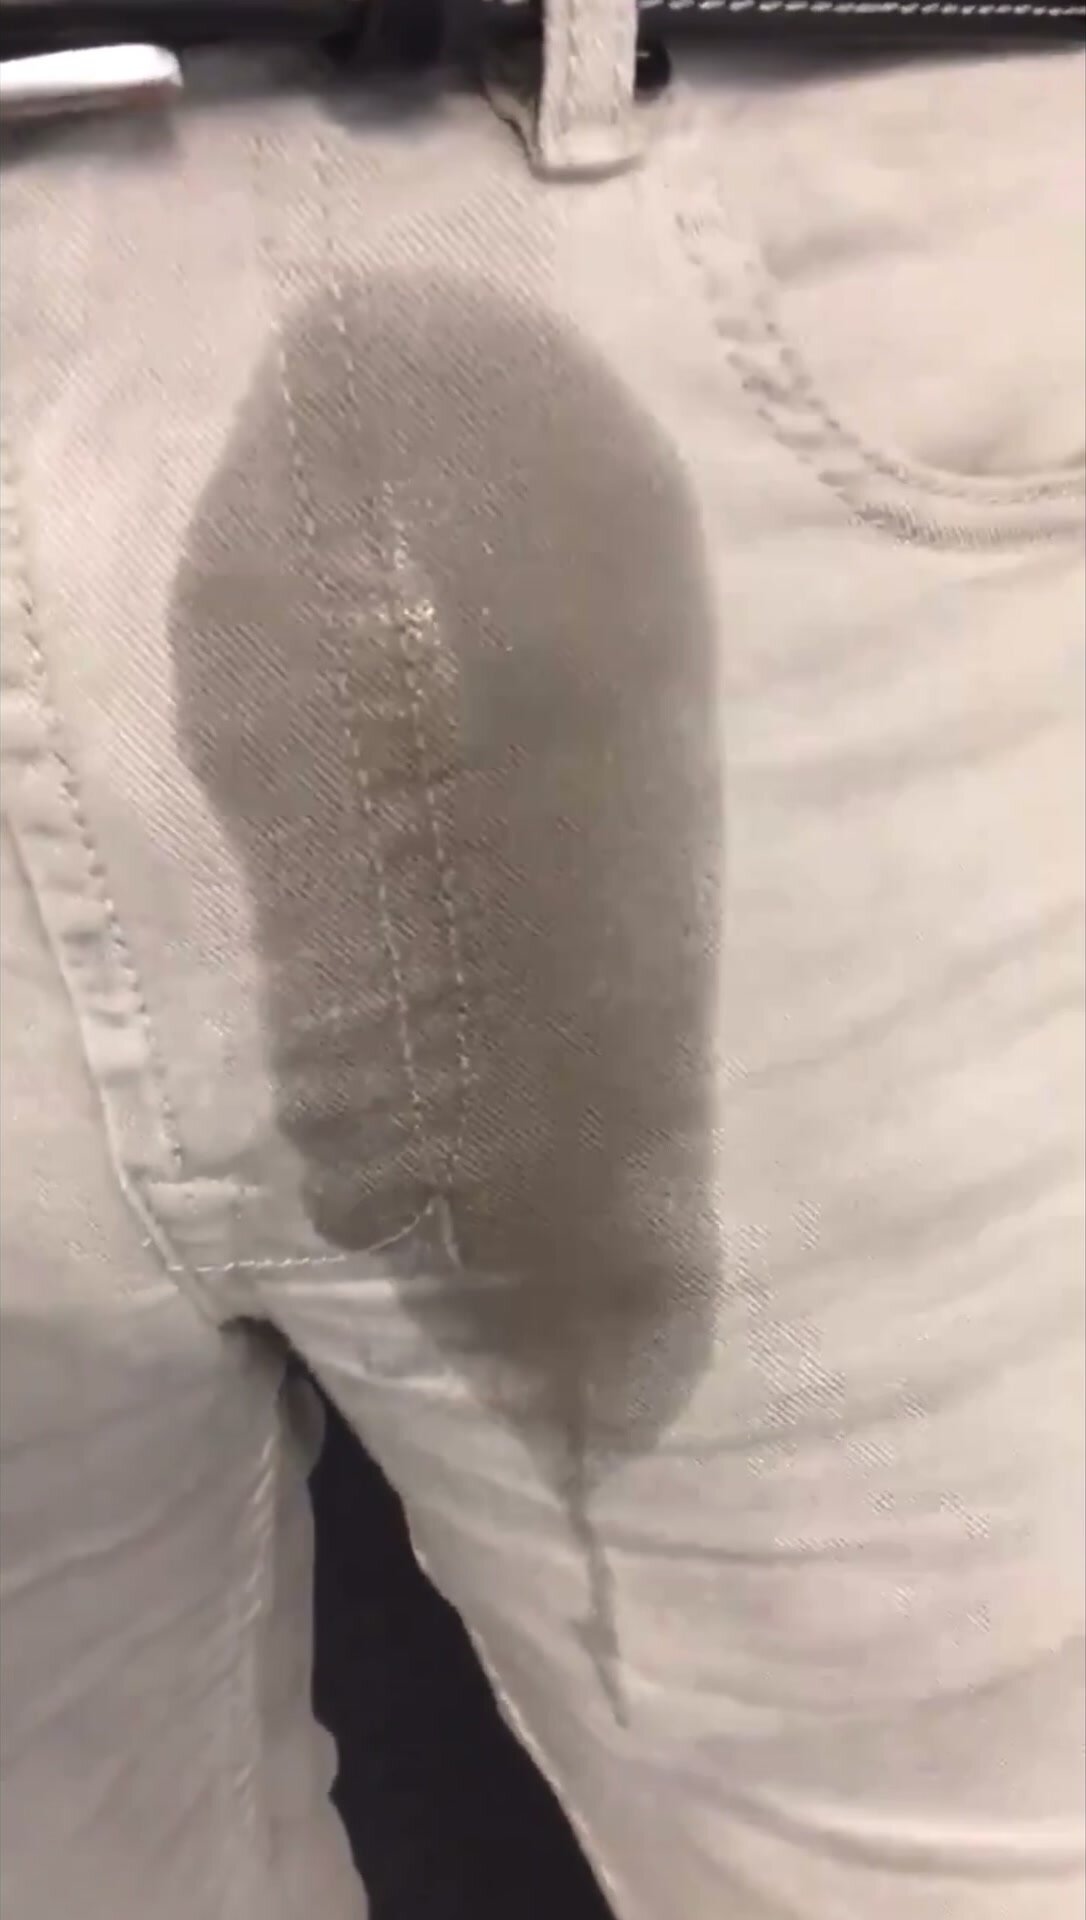 Leaking in pants at the office